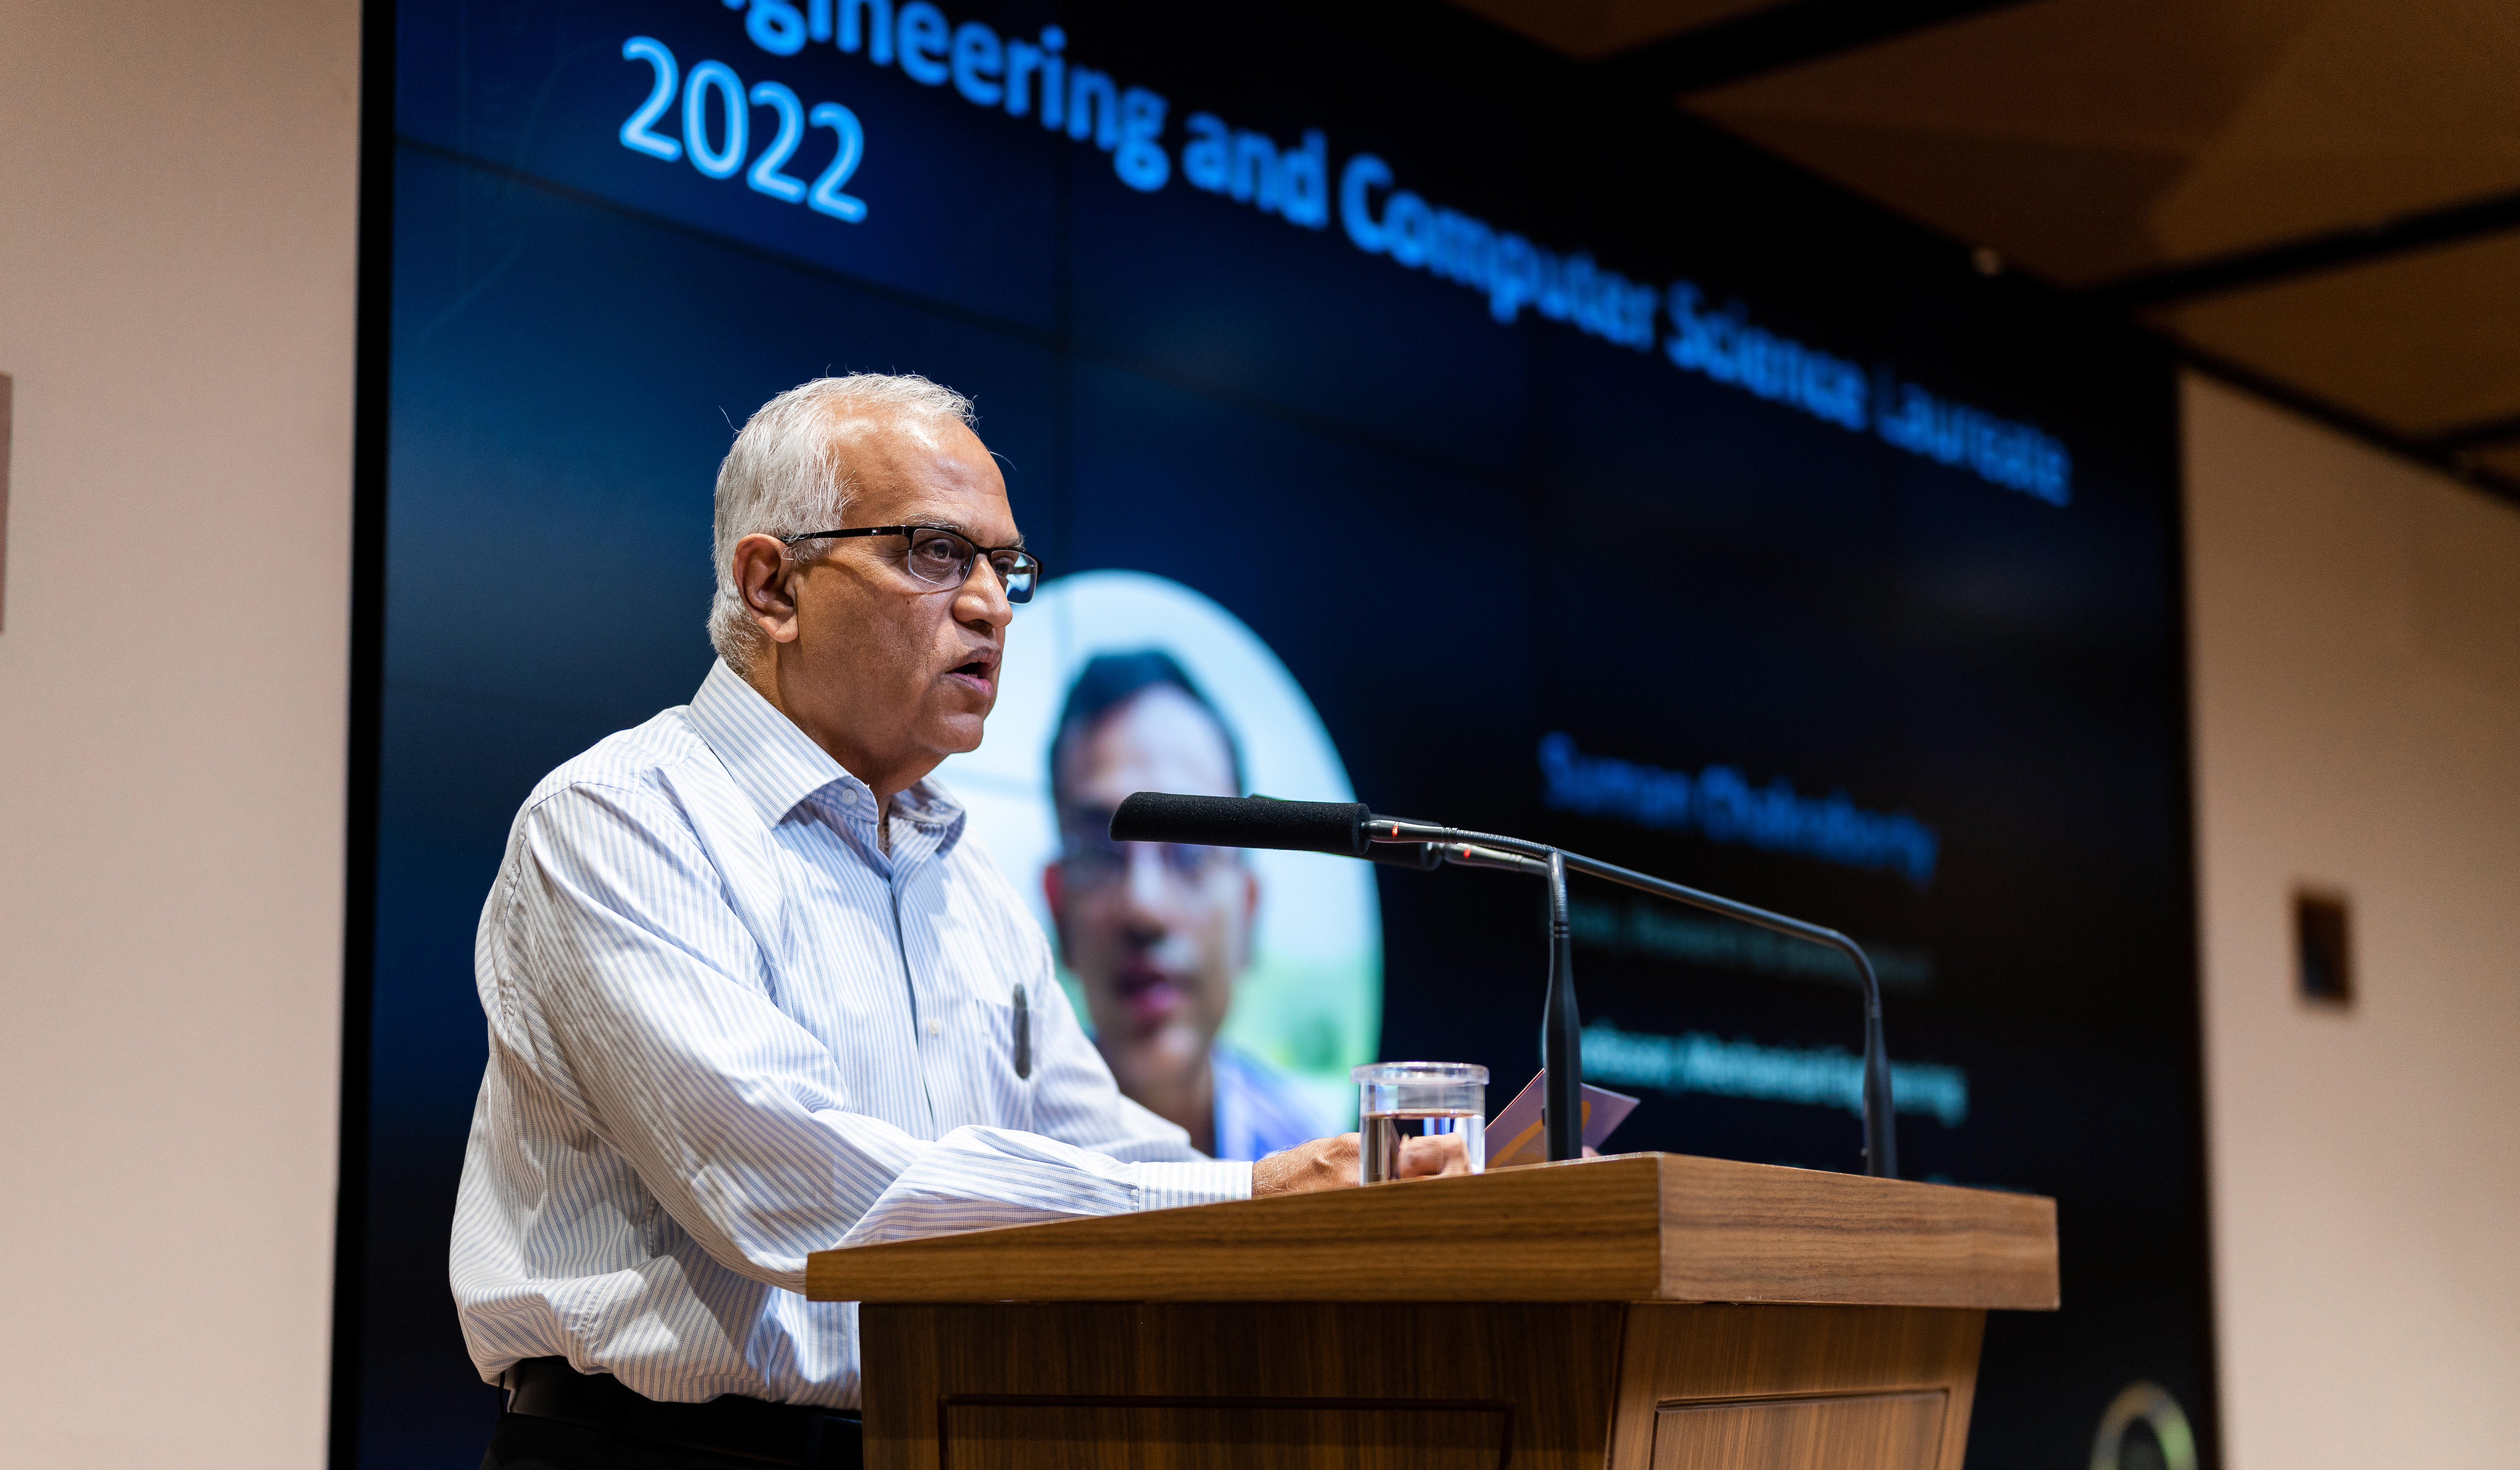 Achor trustee Srinath Batni announcing the Infosys Prize 2022 in Engineering and Computer Science